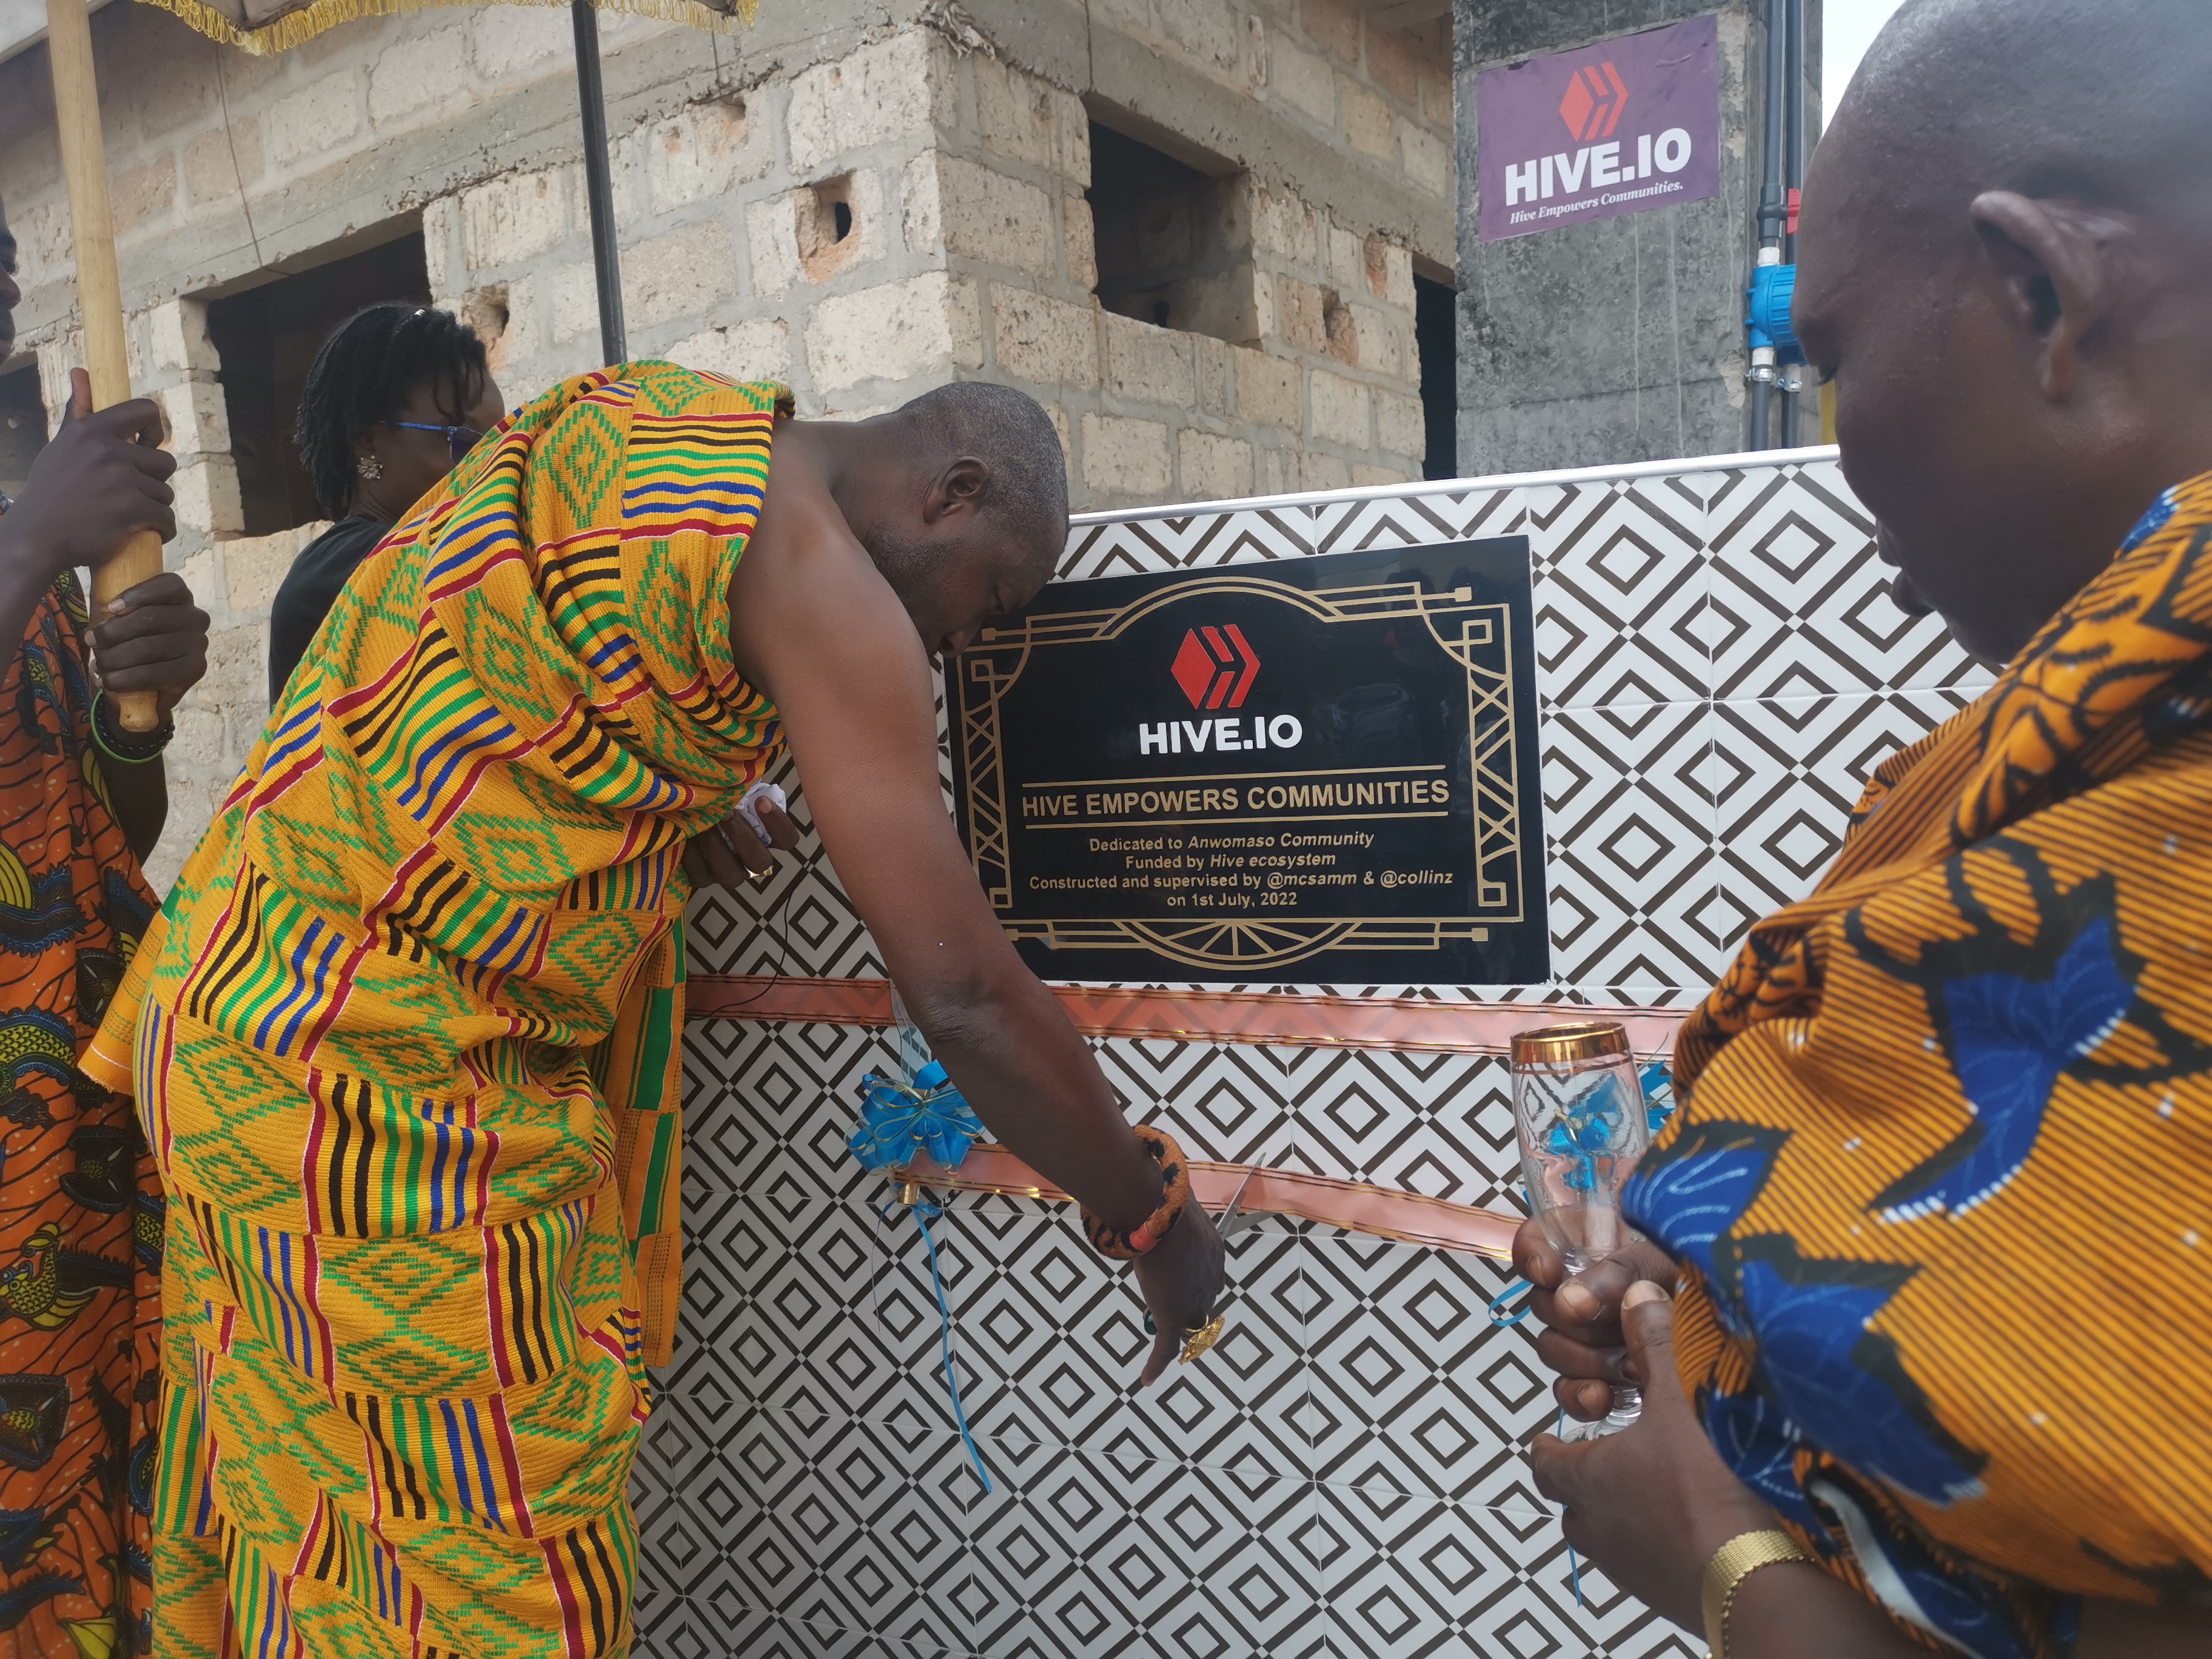 @mcsamm/update-hive-borehole-in-ghana-successfully-launched-today